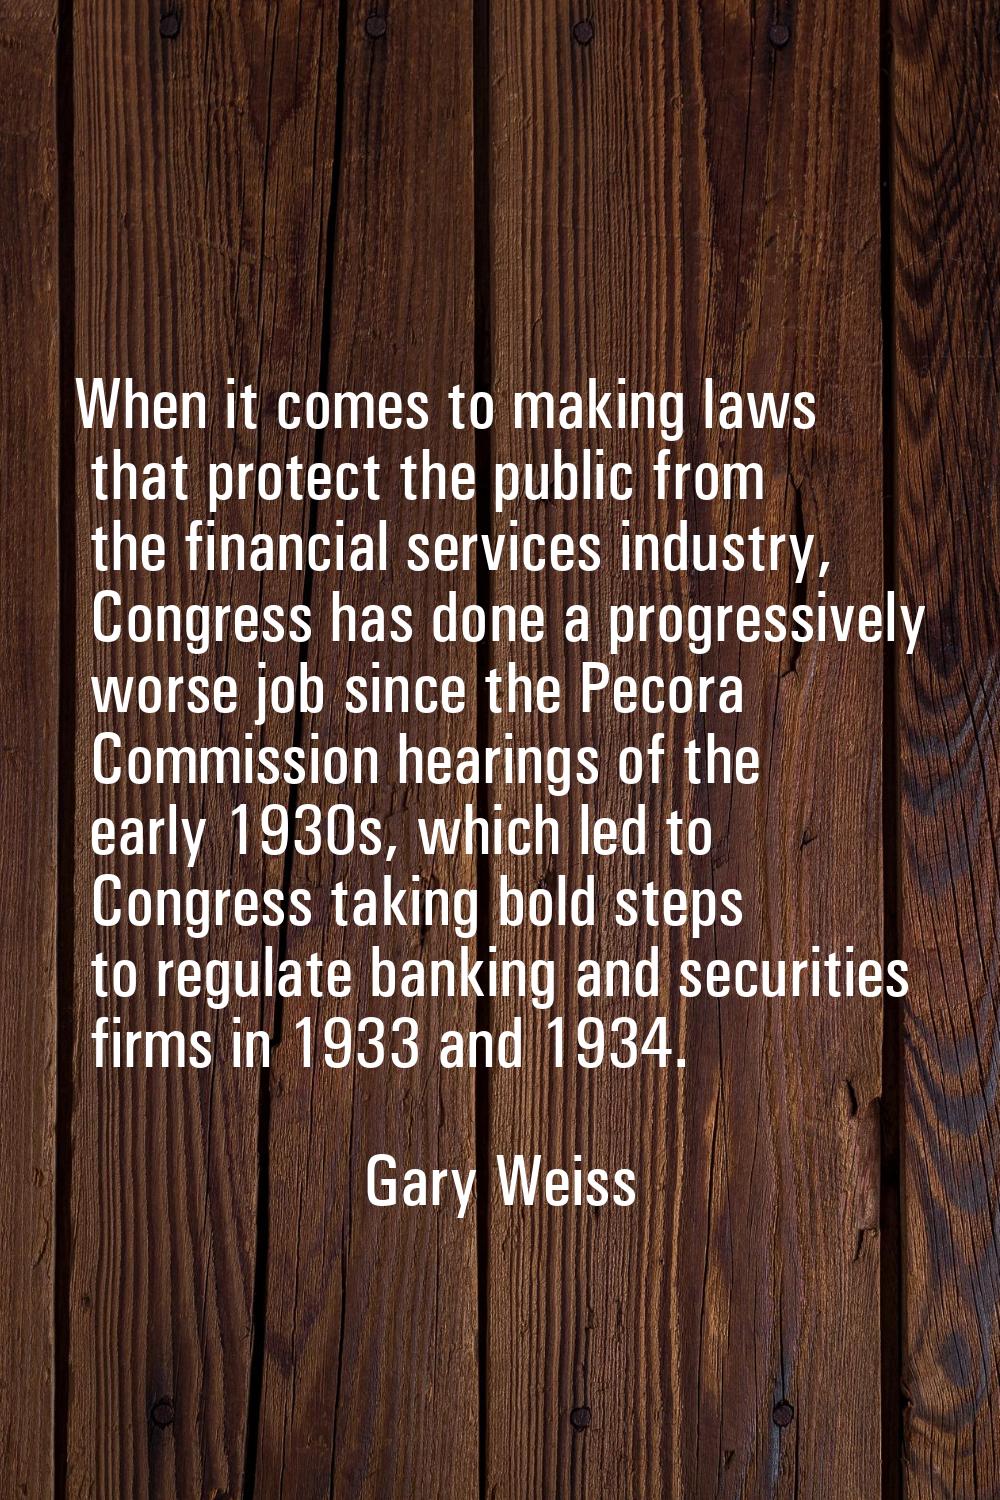 When it comes to making laws that protect the public from the financial services industry, Congress